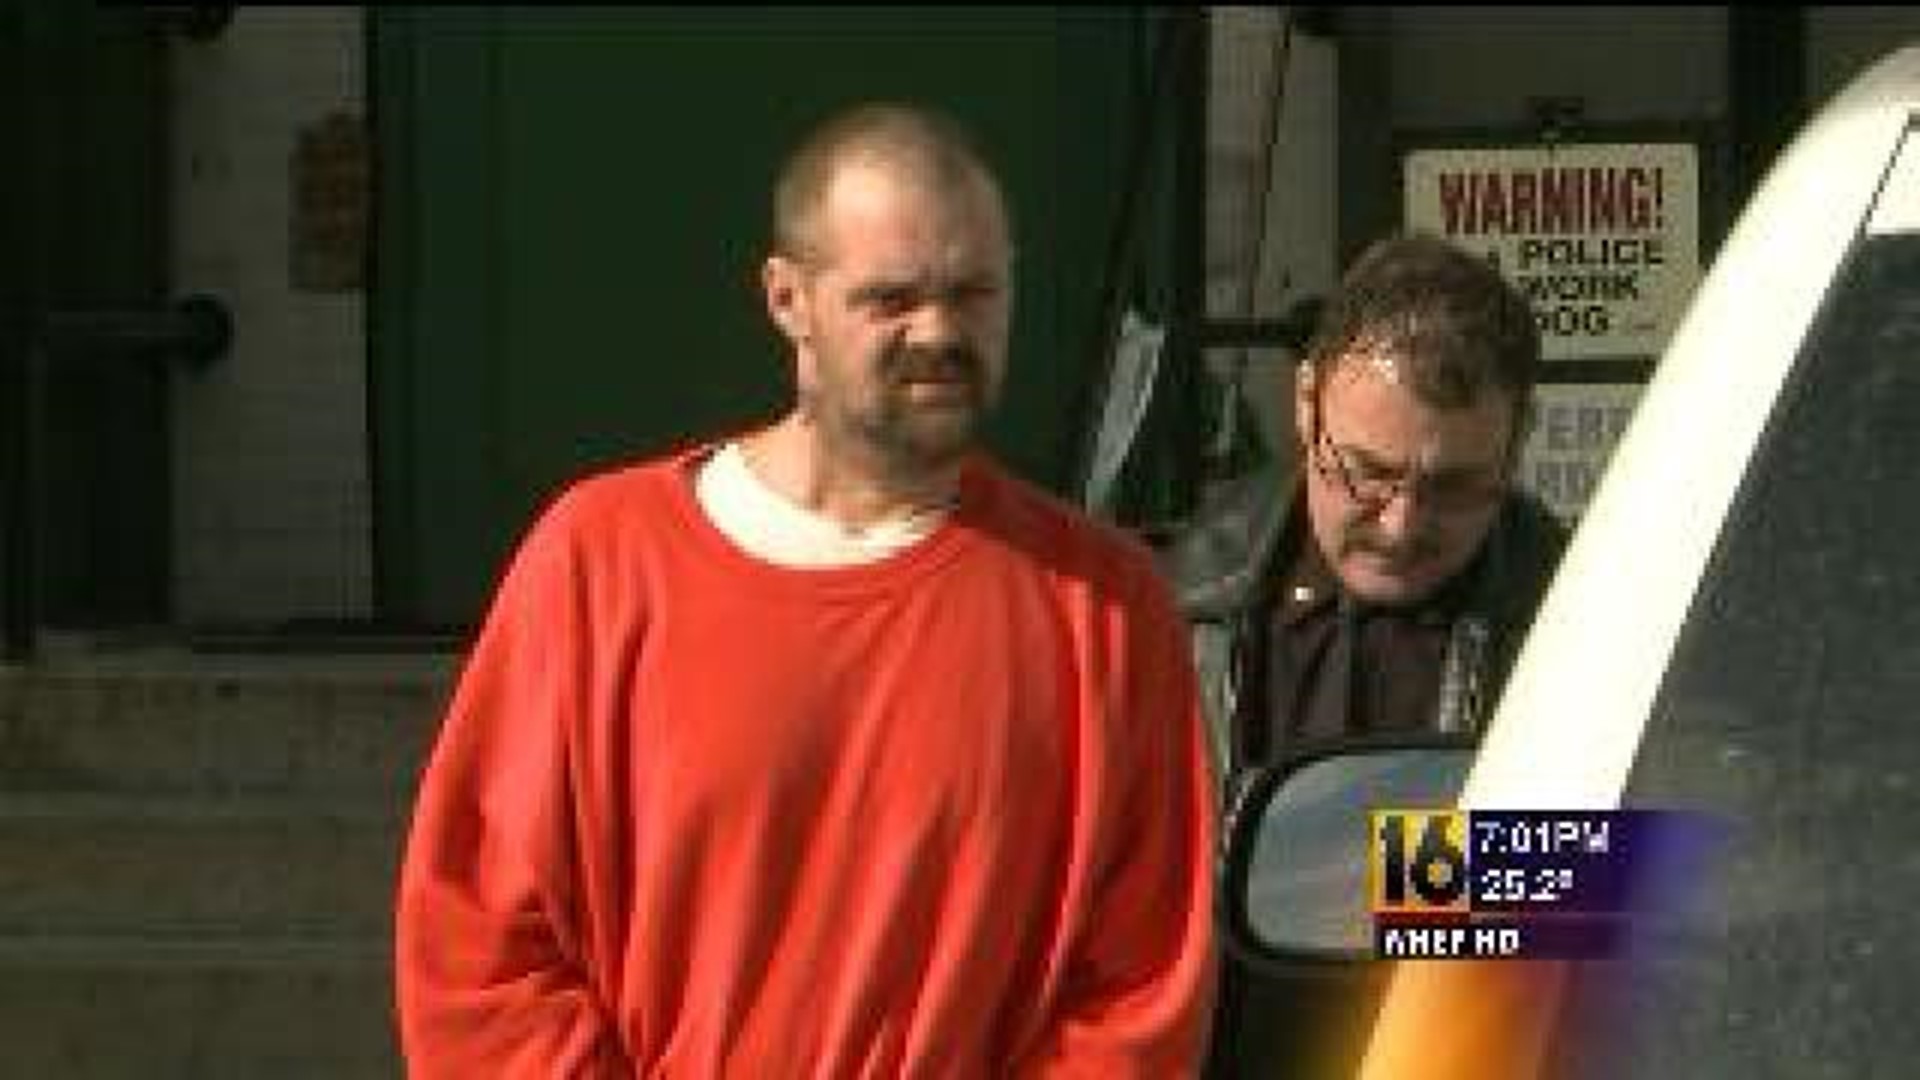 Arsonist Sentenced in Northumberland County